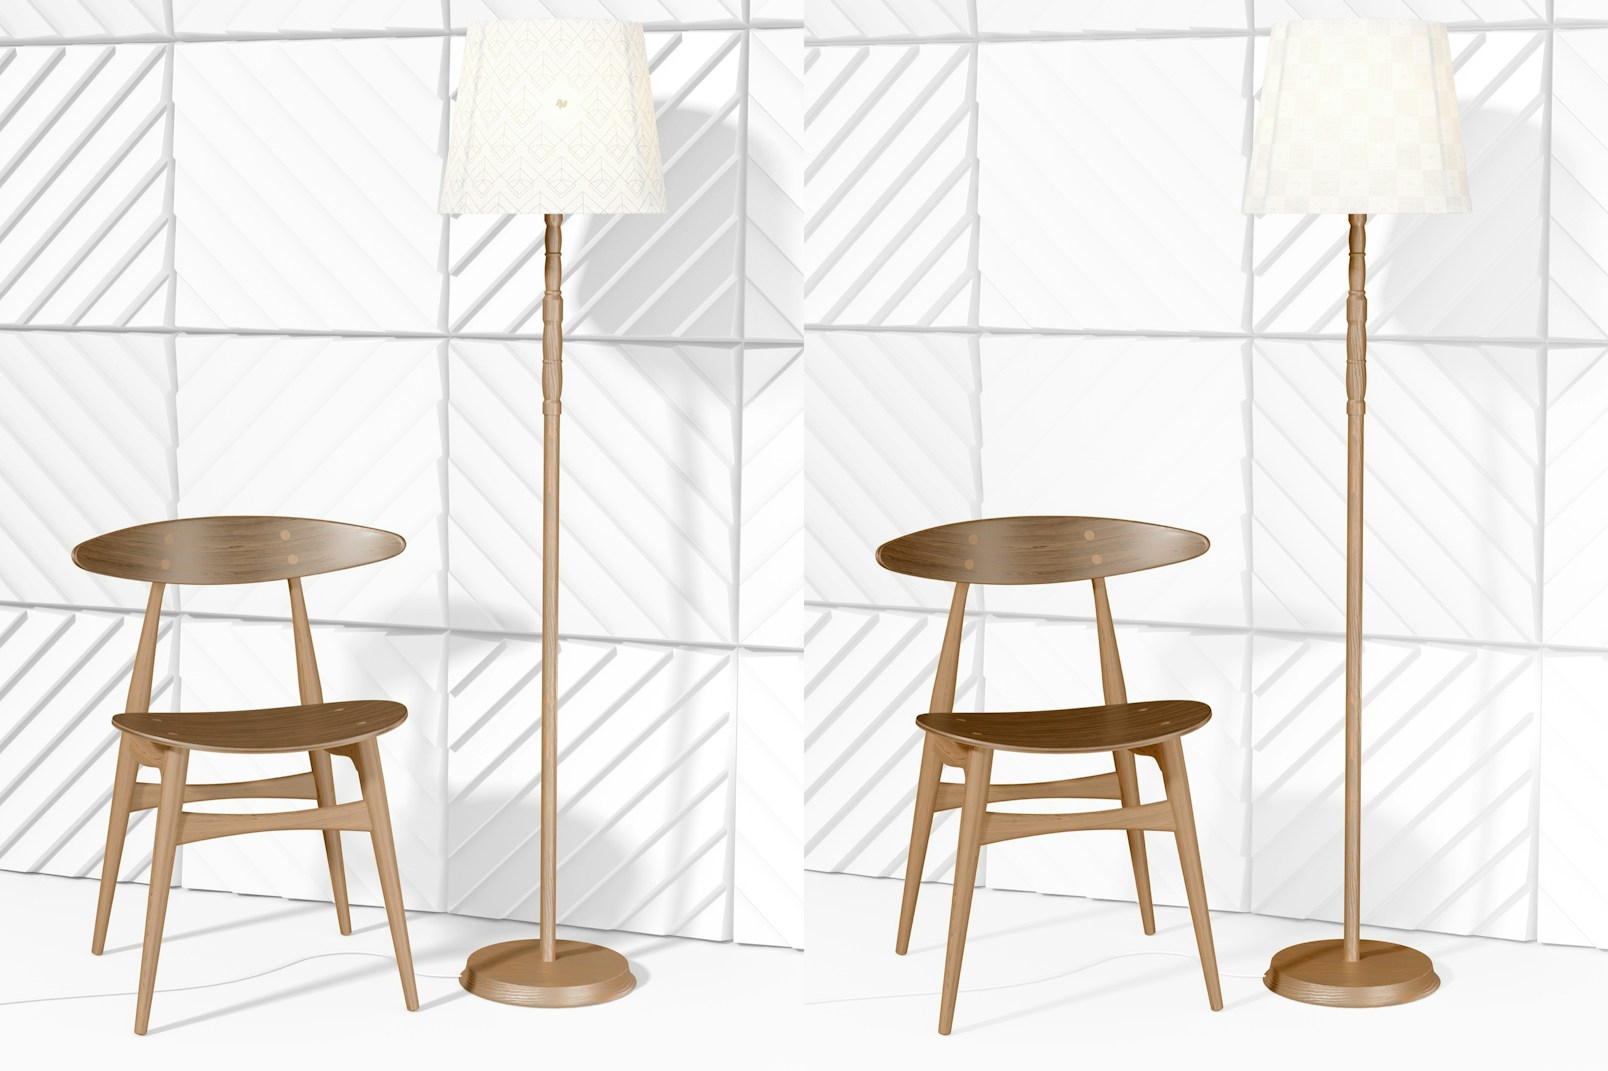 Floor Lamp with Wooden Chair Mockup